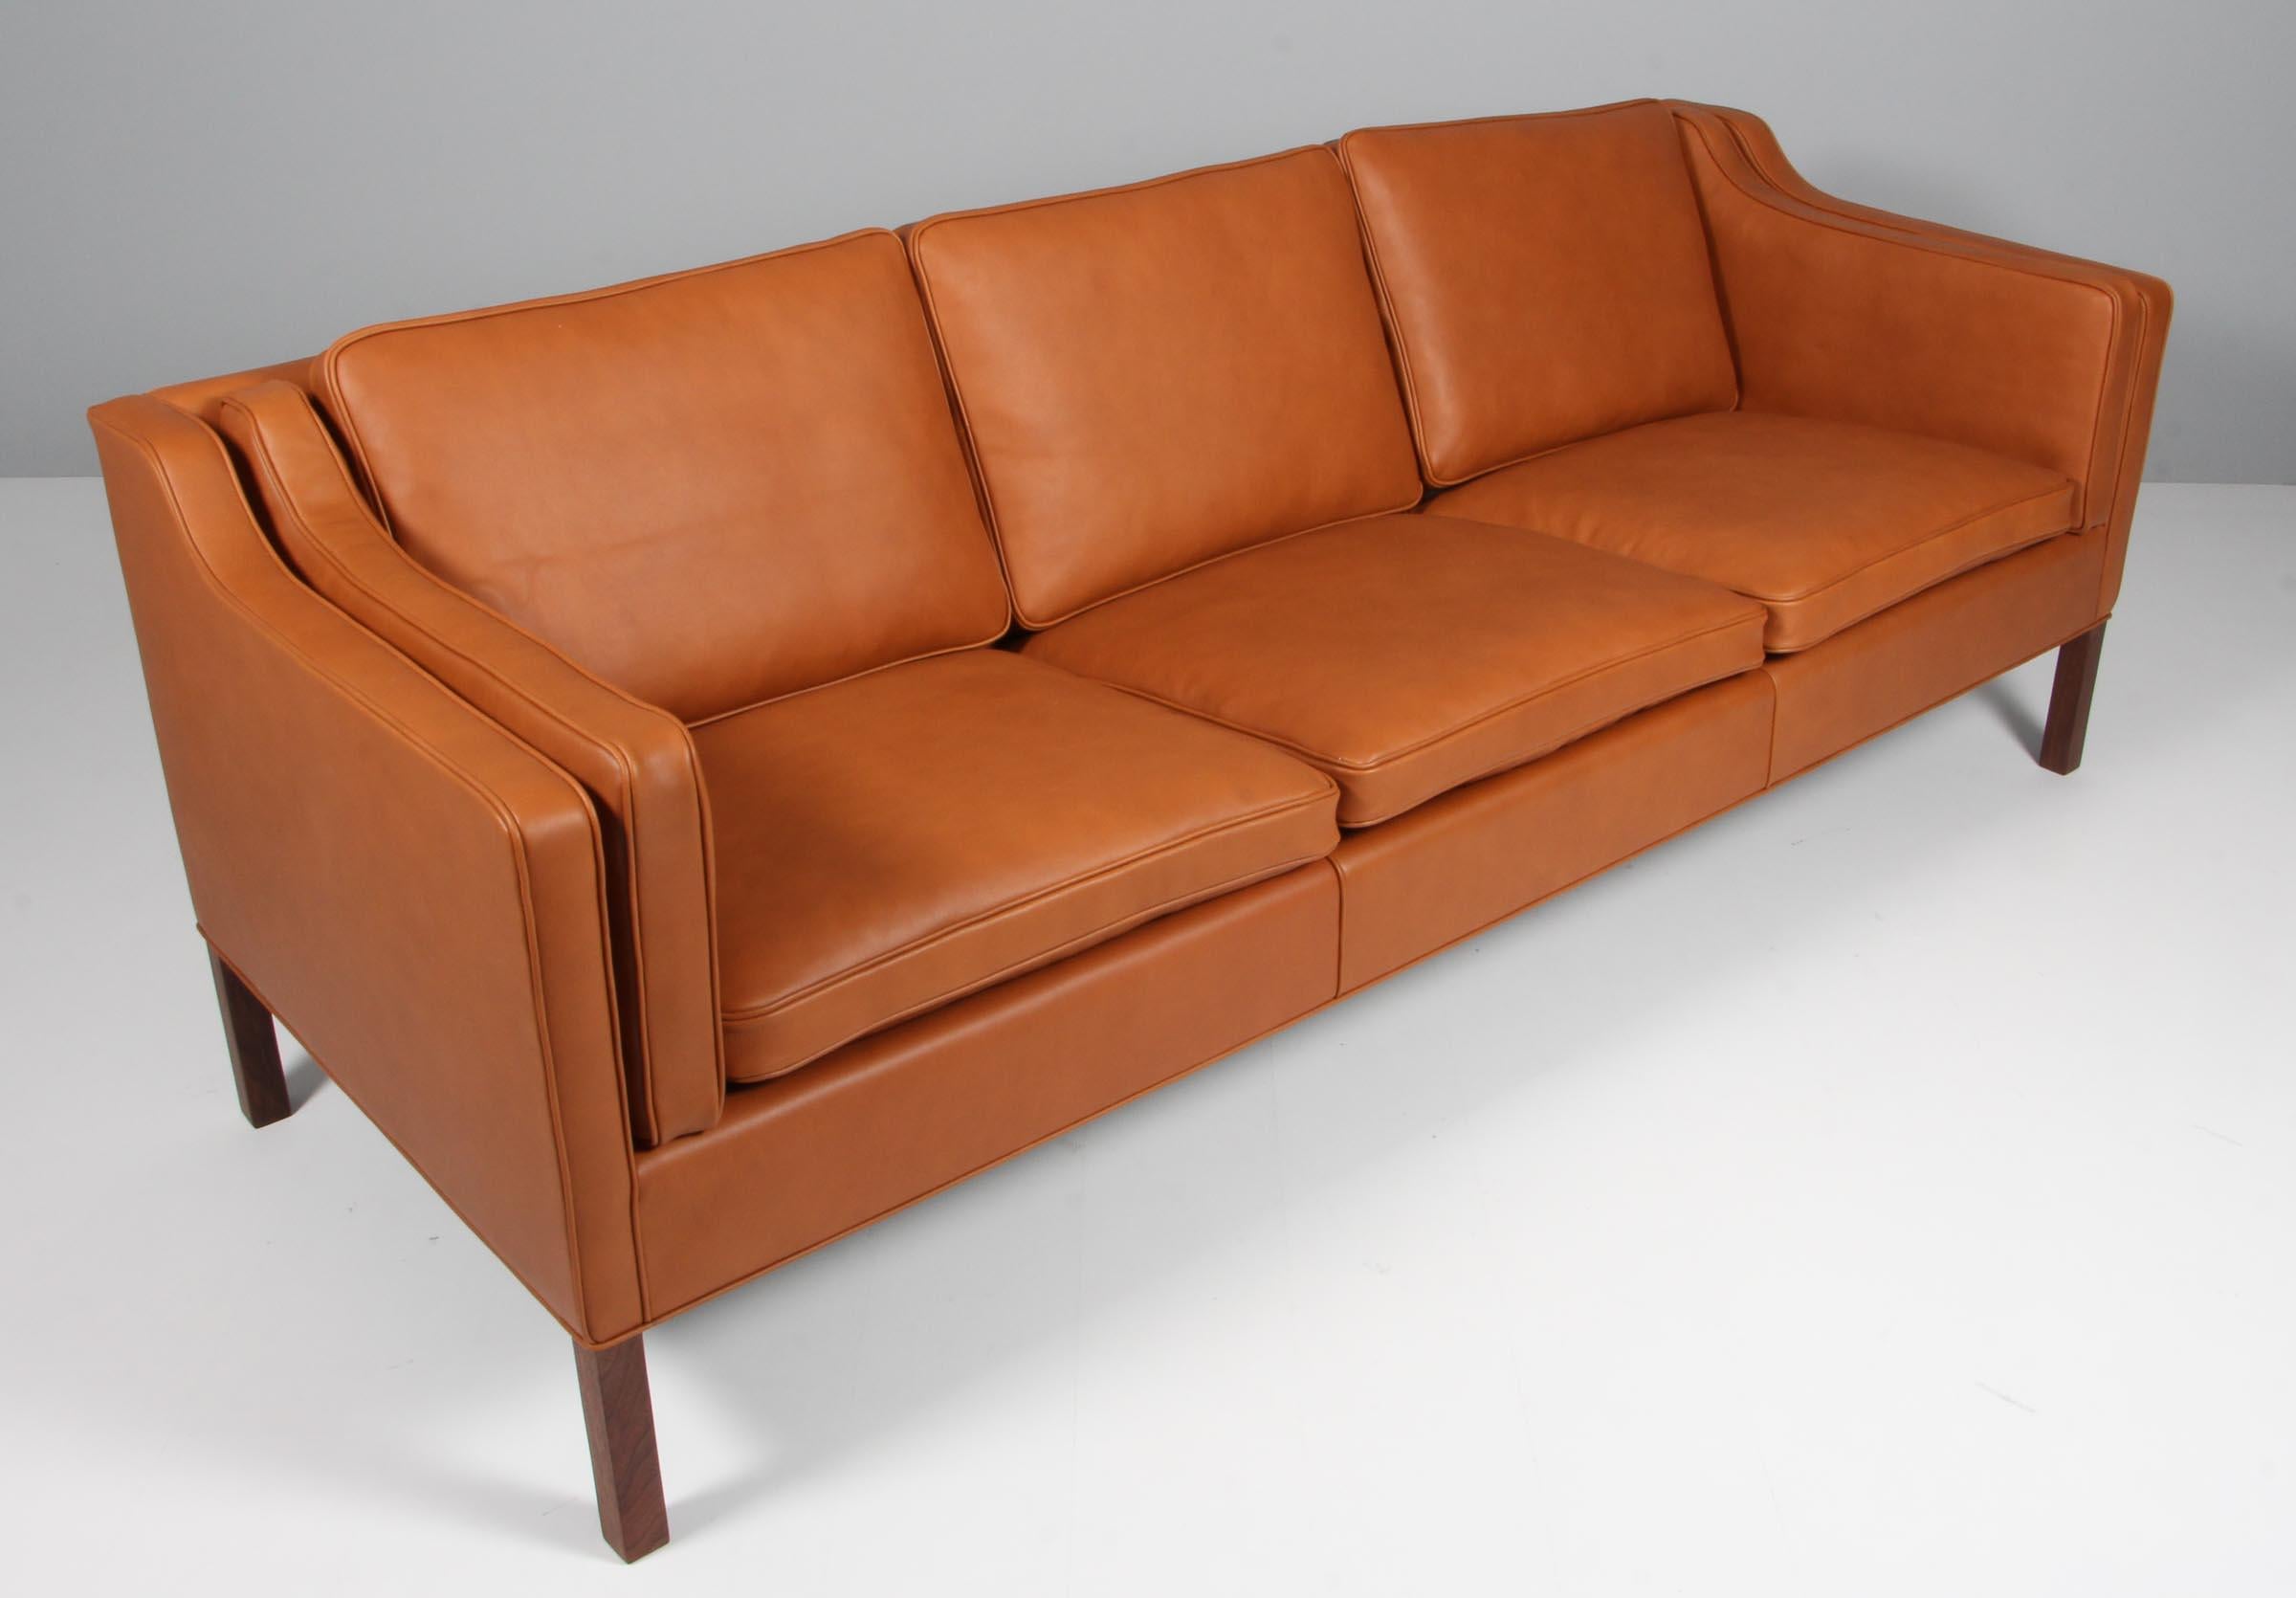 Børge Mogensen three-seat sofa new upholstered with walnut elegance aniline leather.

Legs of teak.

Model 2213, made by Fredericia Furniture.